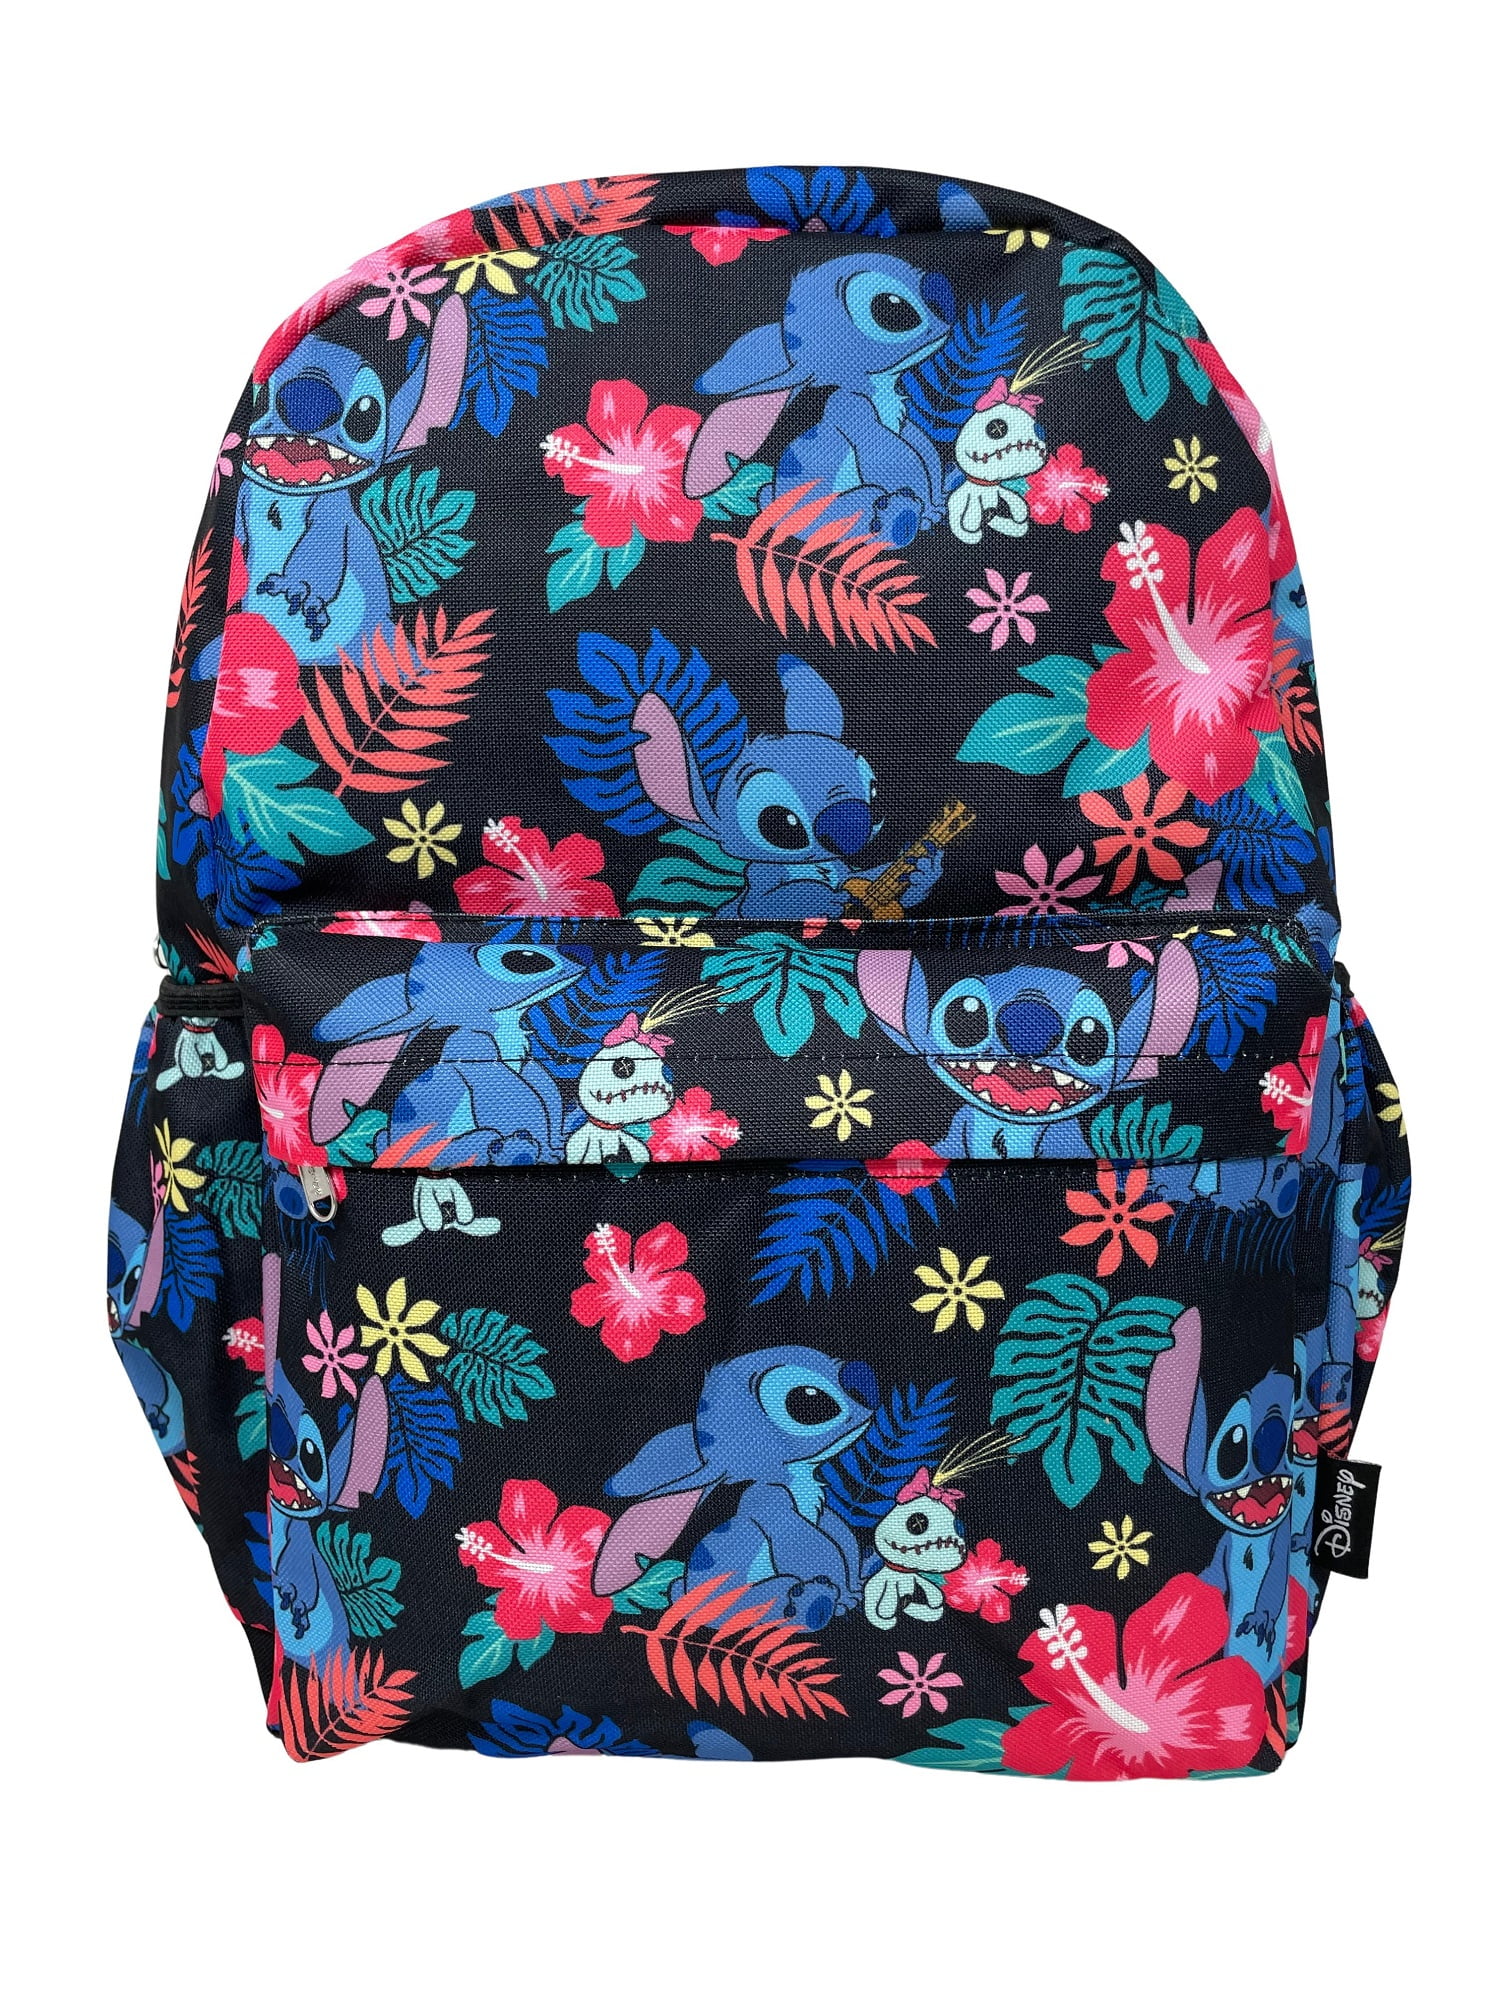 Lilo And Stitch 3D Backpack Floral Large Size 